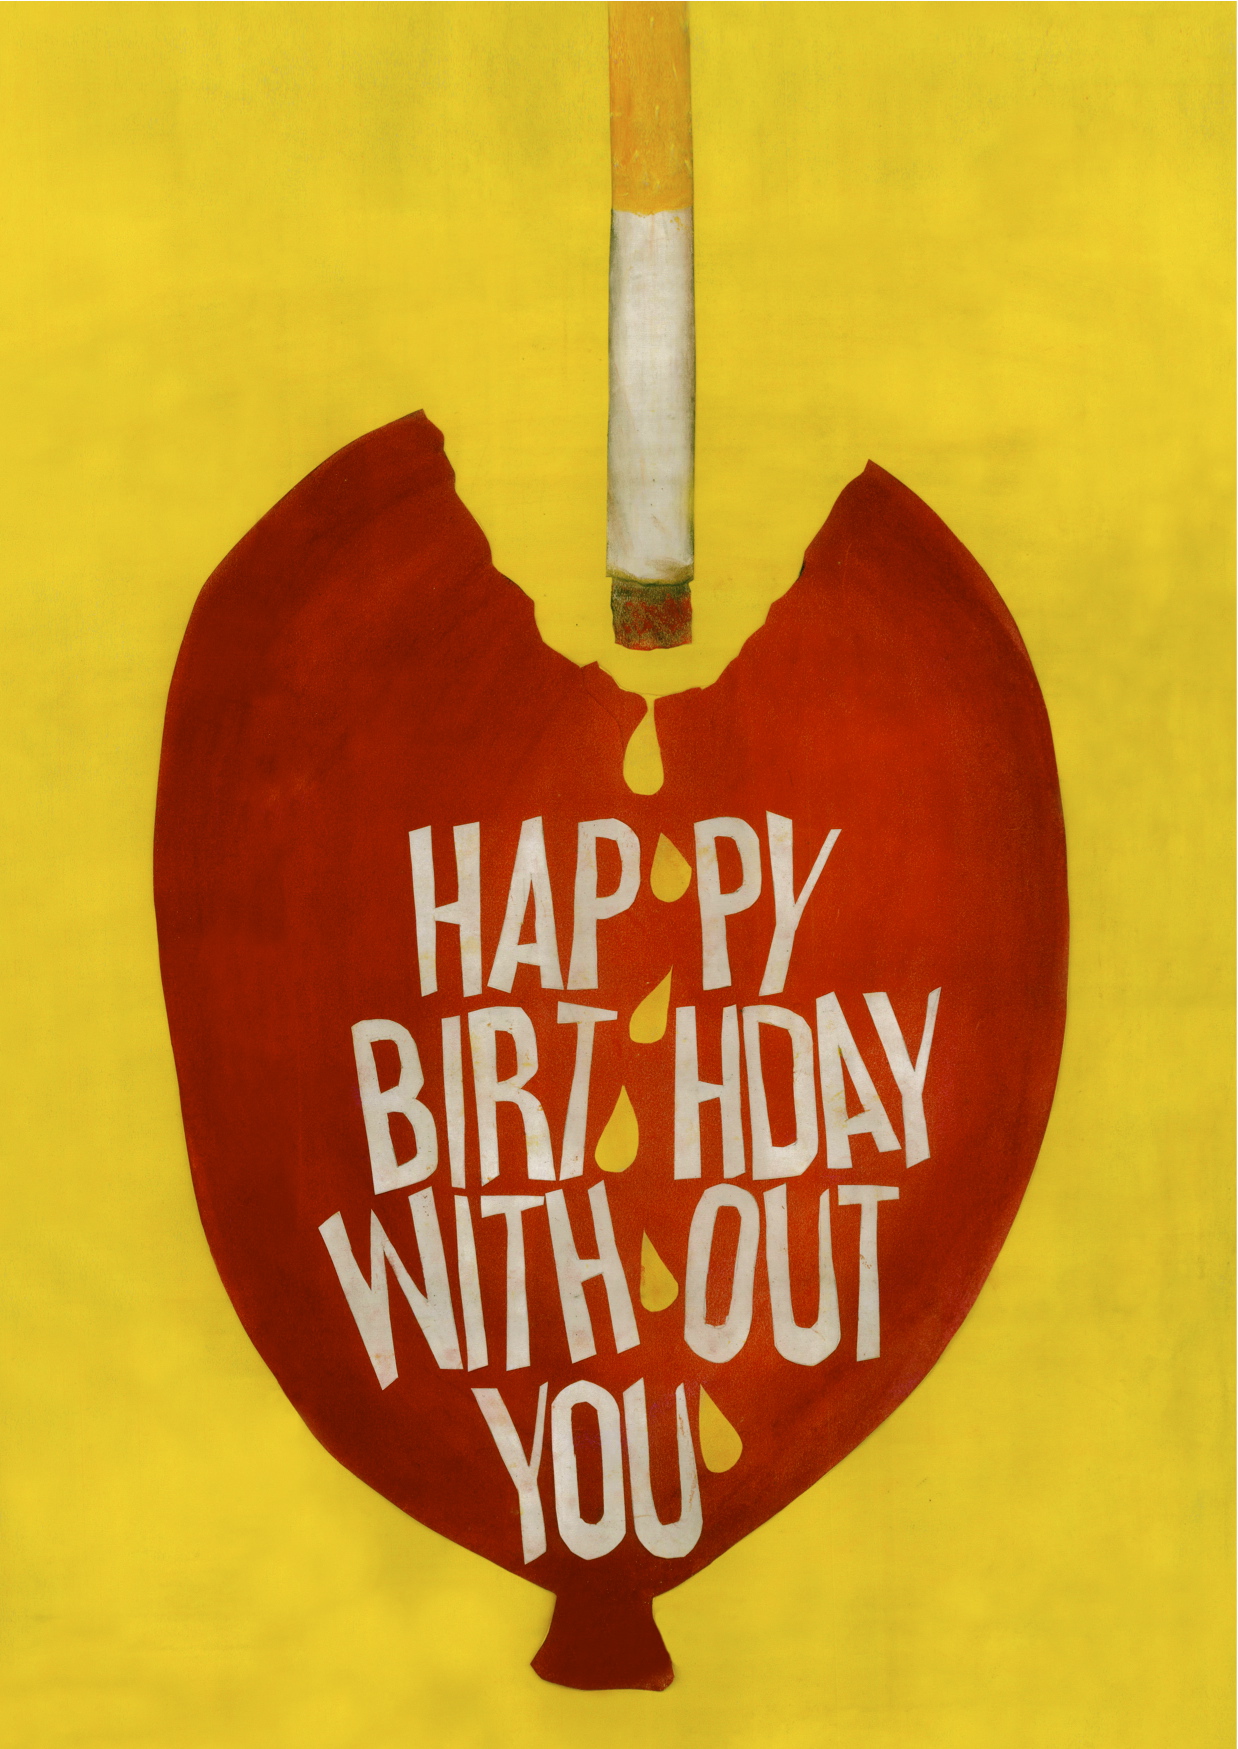 Sonia Jalaly – Happy Birthday Without You | First Draft1238 x 1749